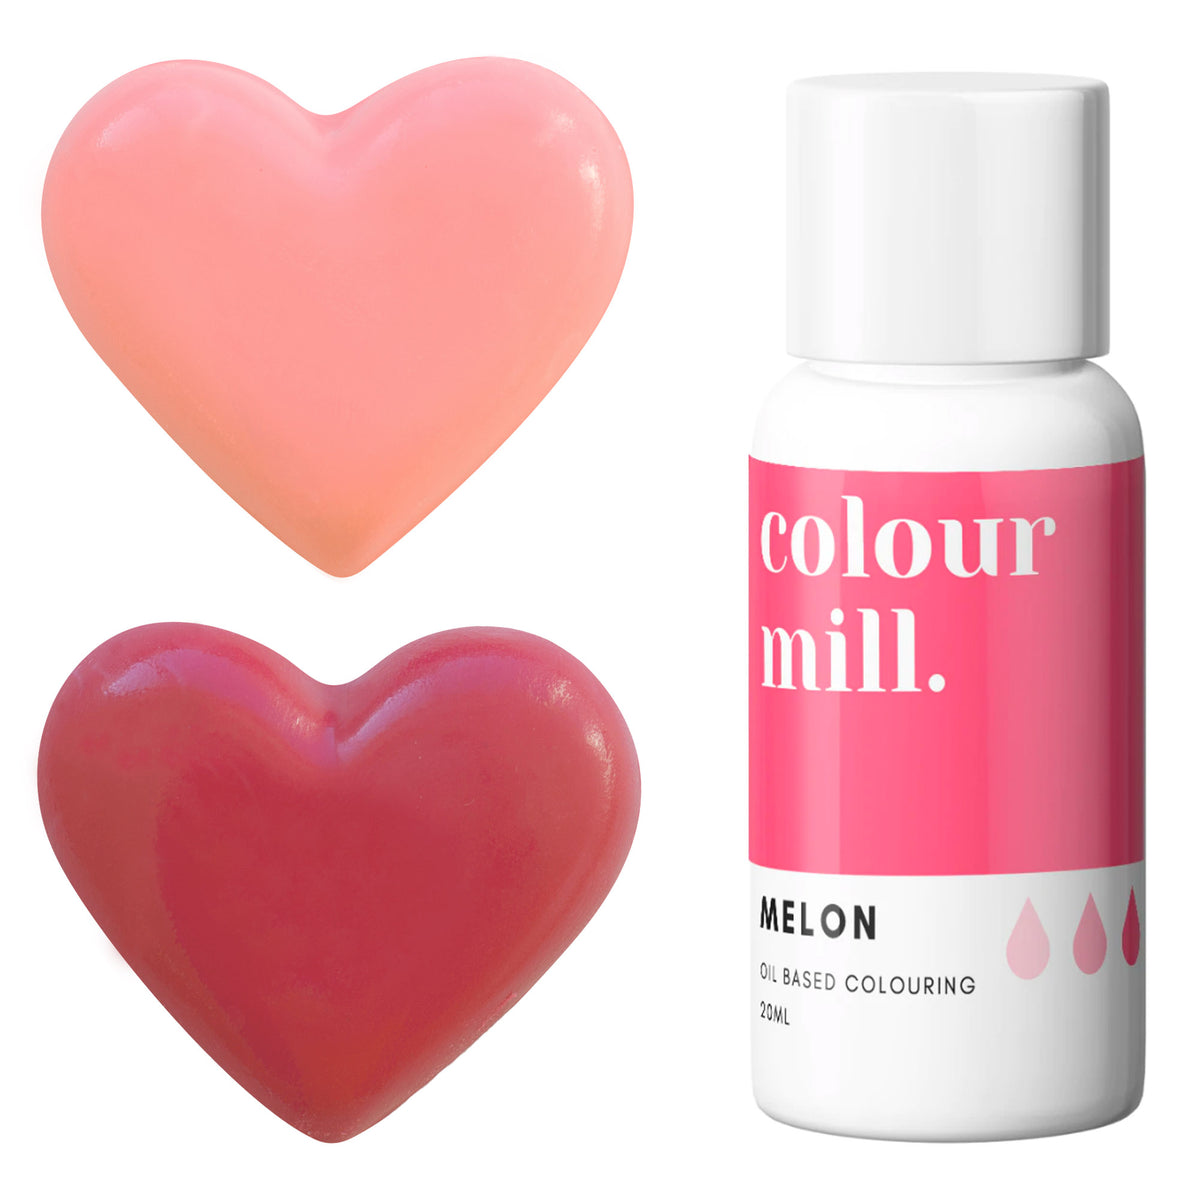 Melon Colour Mill Oil Based Food Coloring